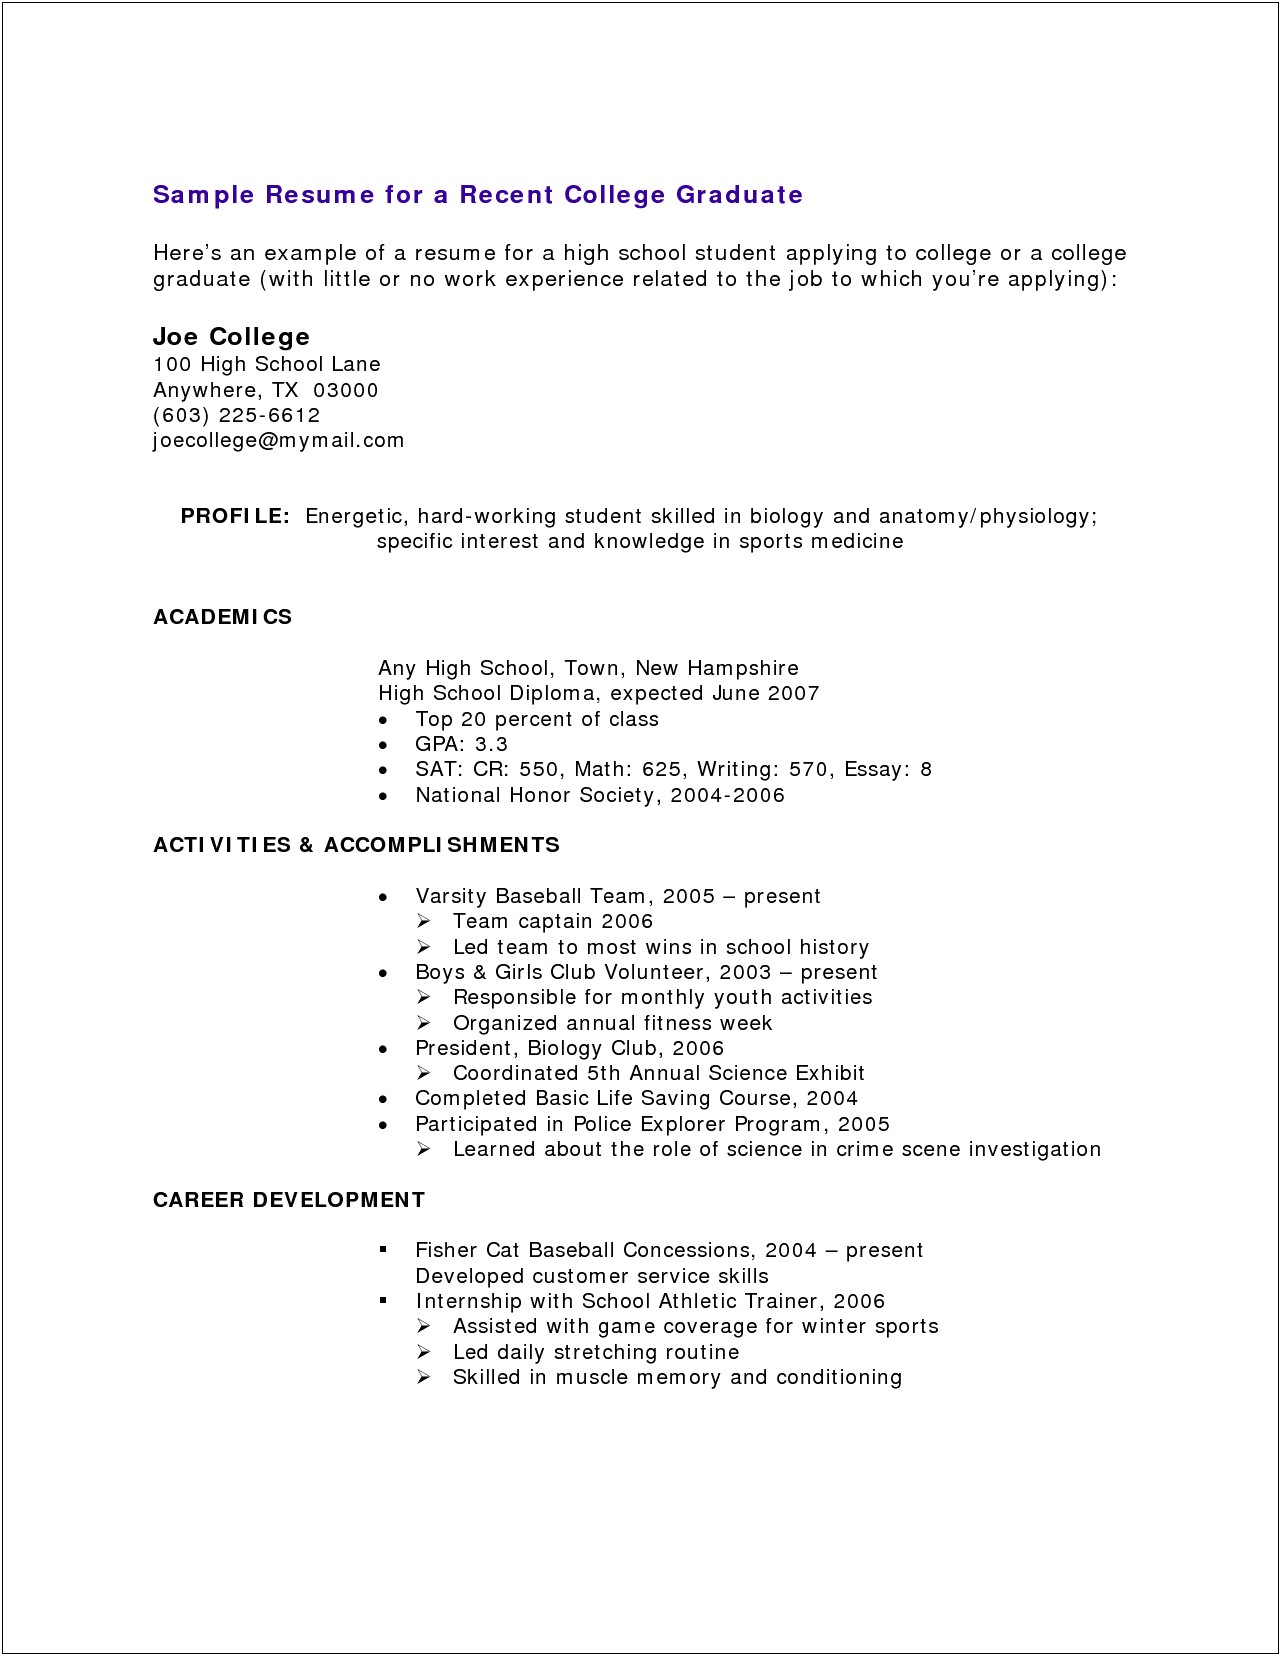 Basic Resume With No Work Experience